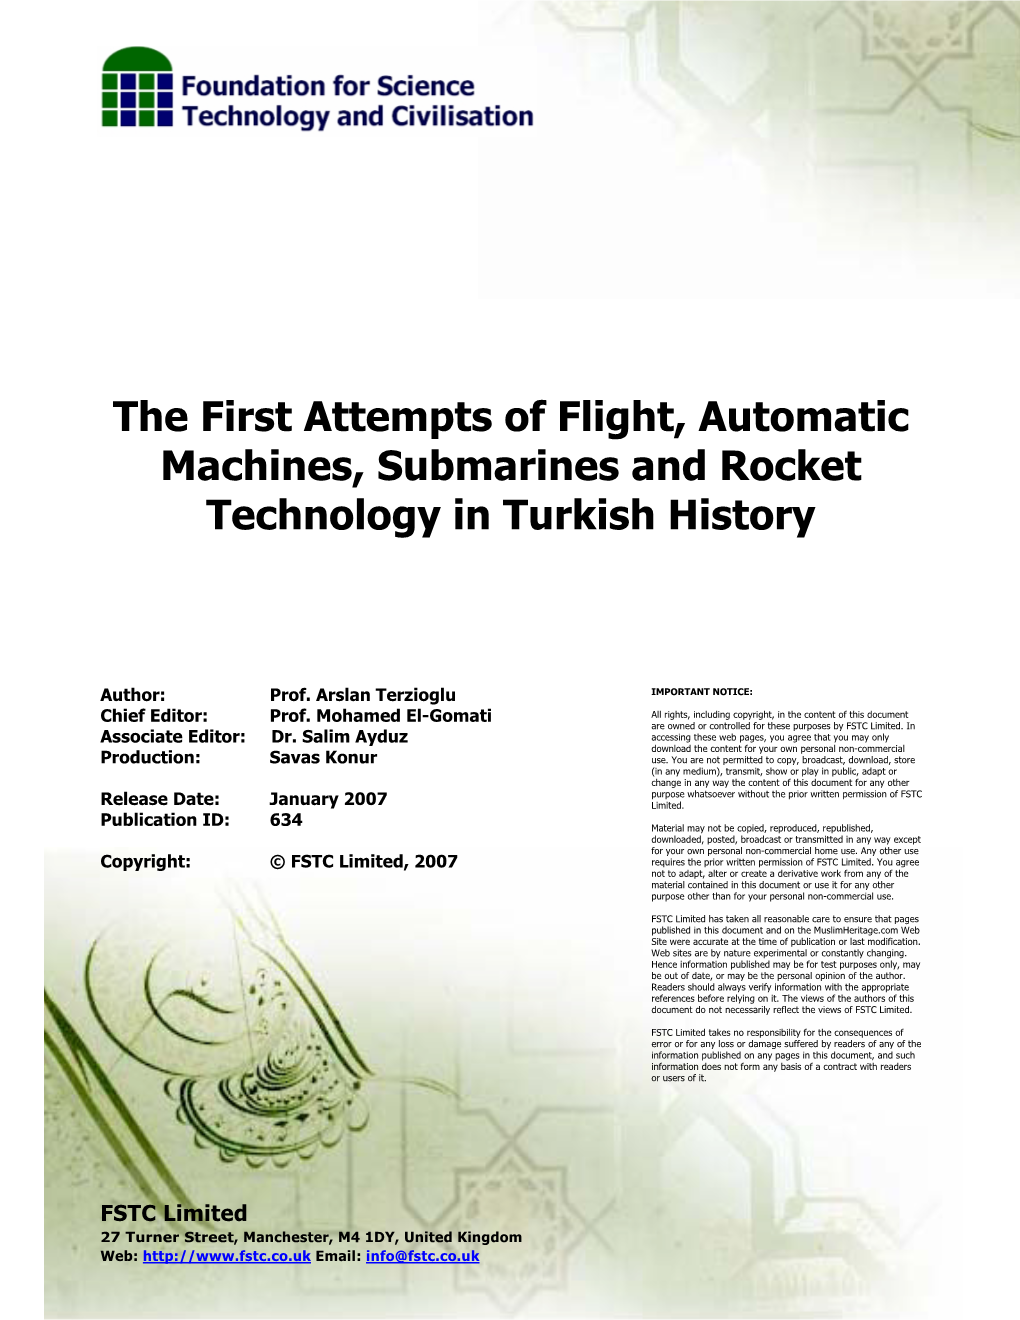 The First Attempts of Flight, Automatic Machines, Submarines and Rocket